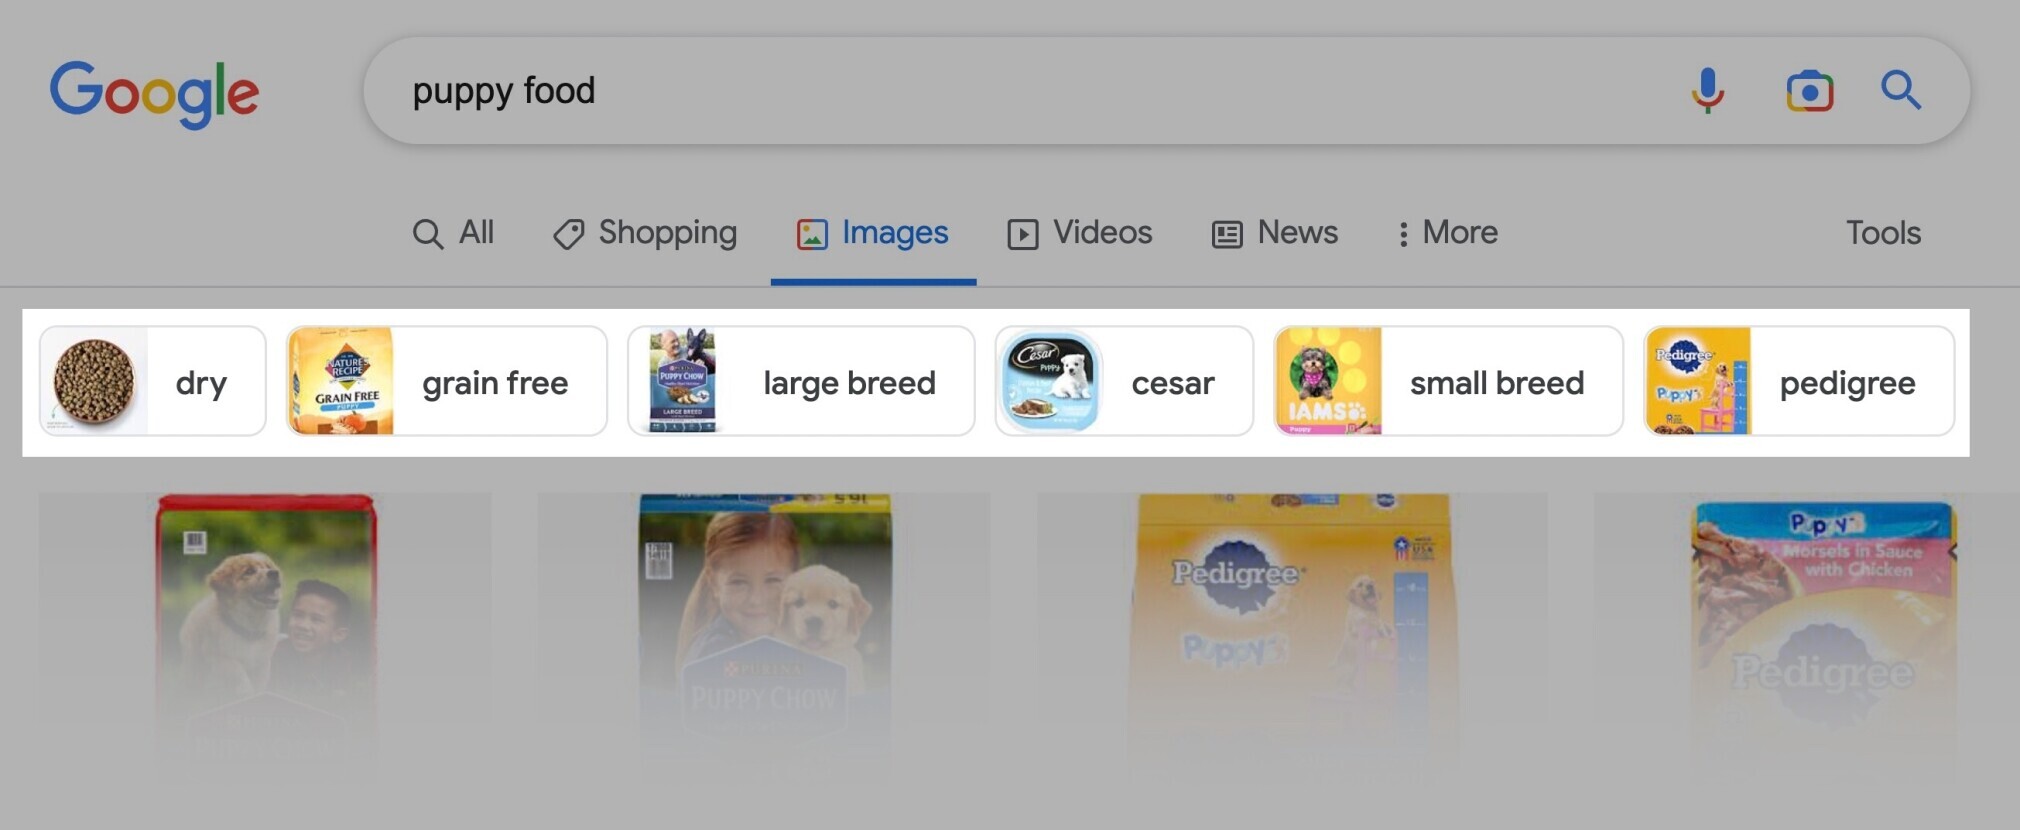 Google Image tags for the keyword "puppy food"